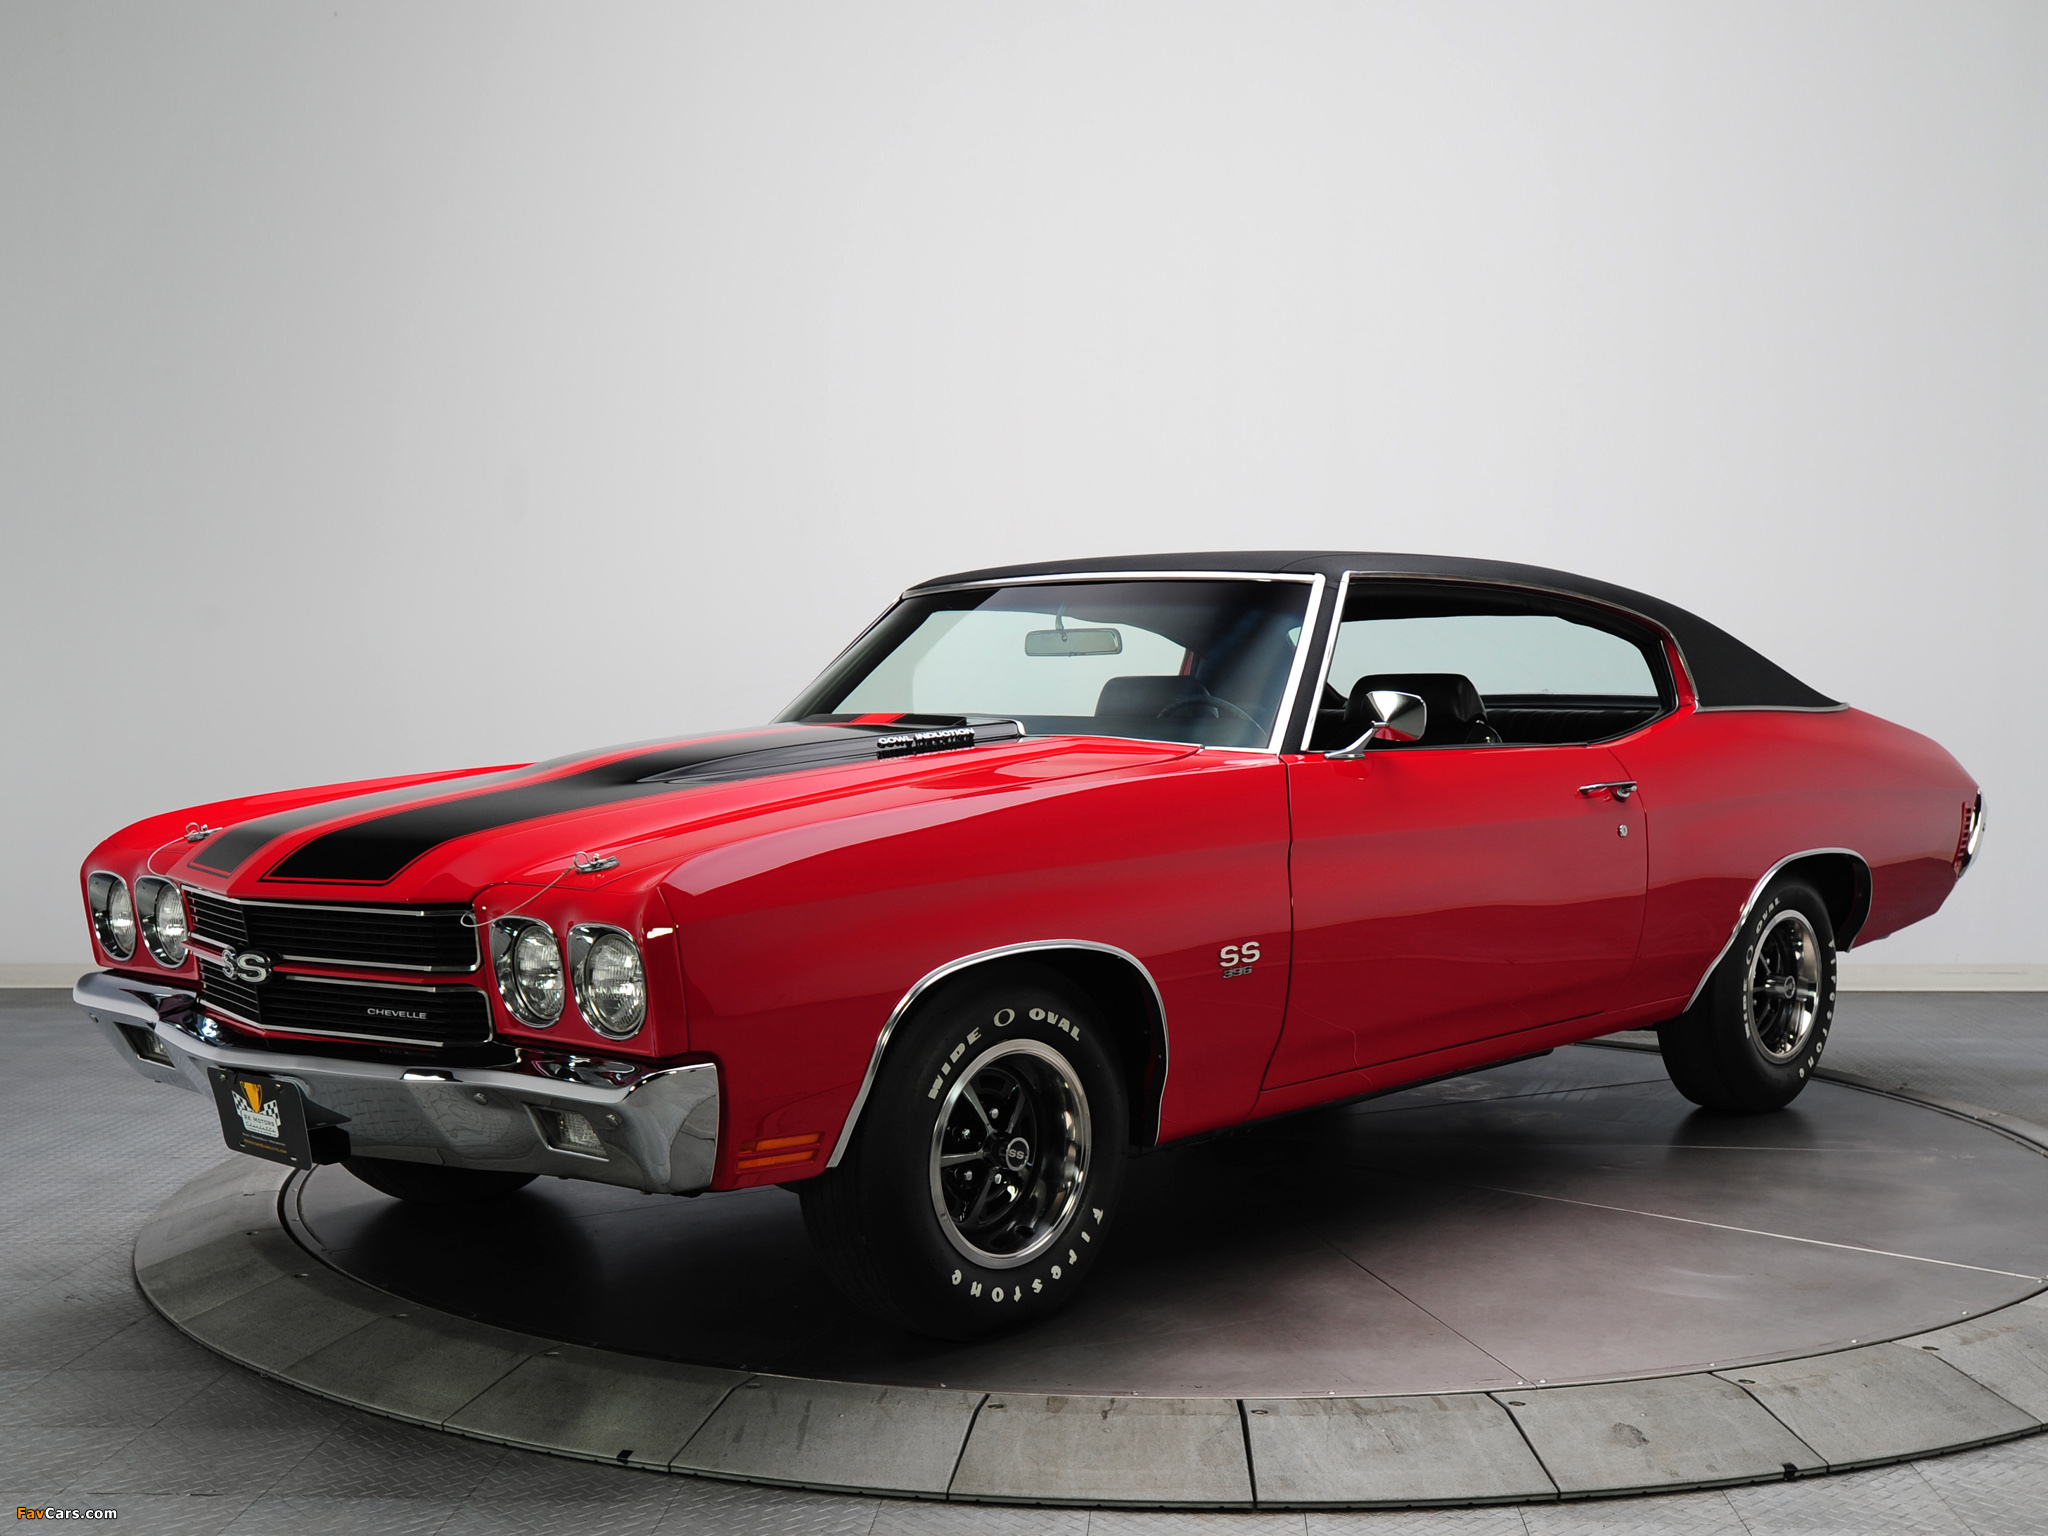 Chevrolet Chevelle SS 396 Hardtop Coupe 1970 pictures (2048 x 1536)